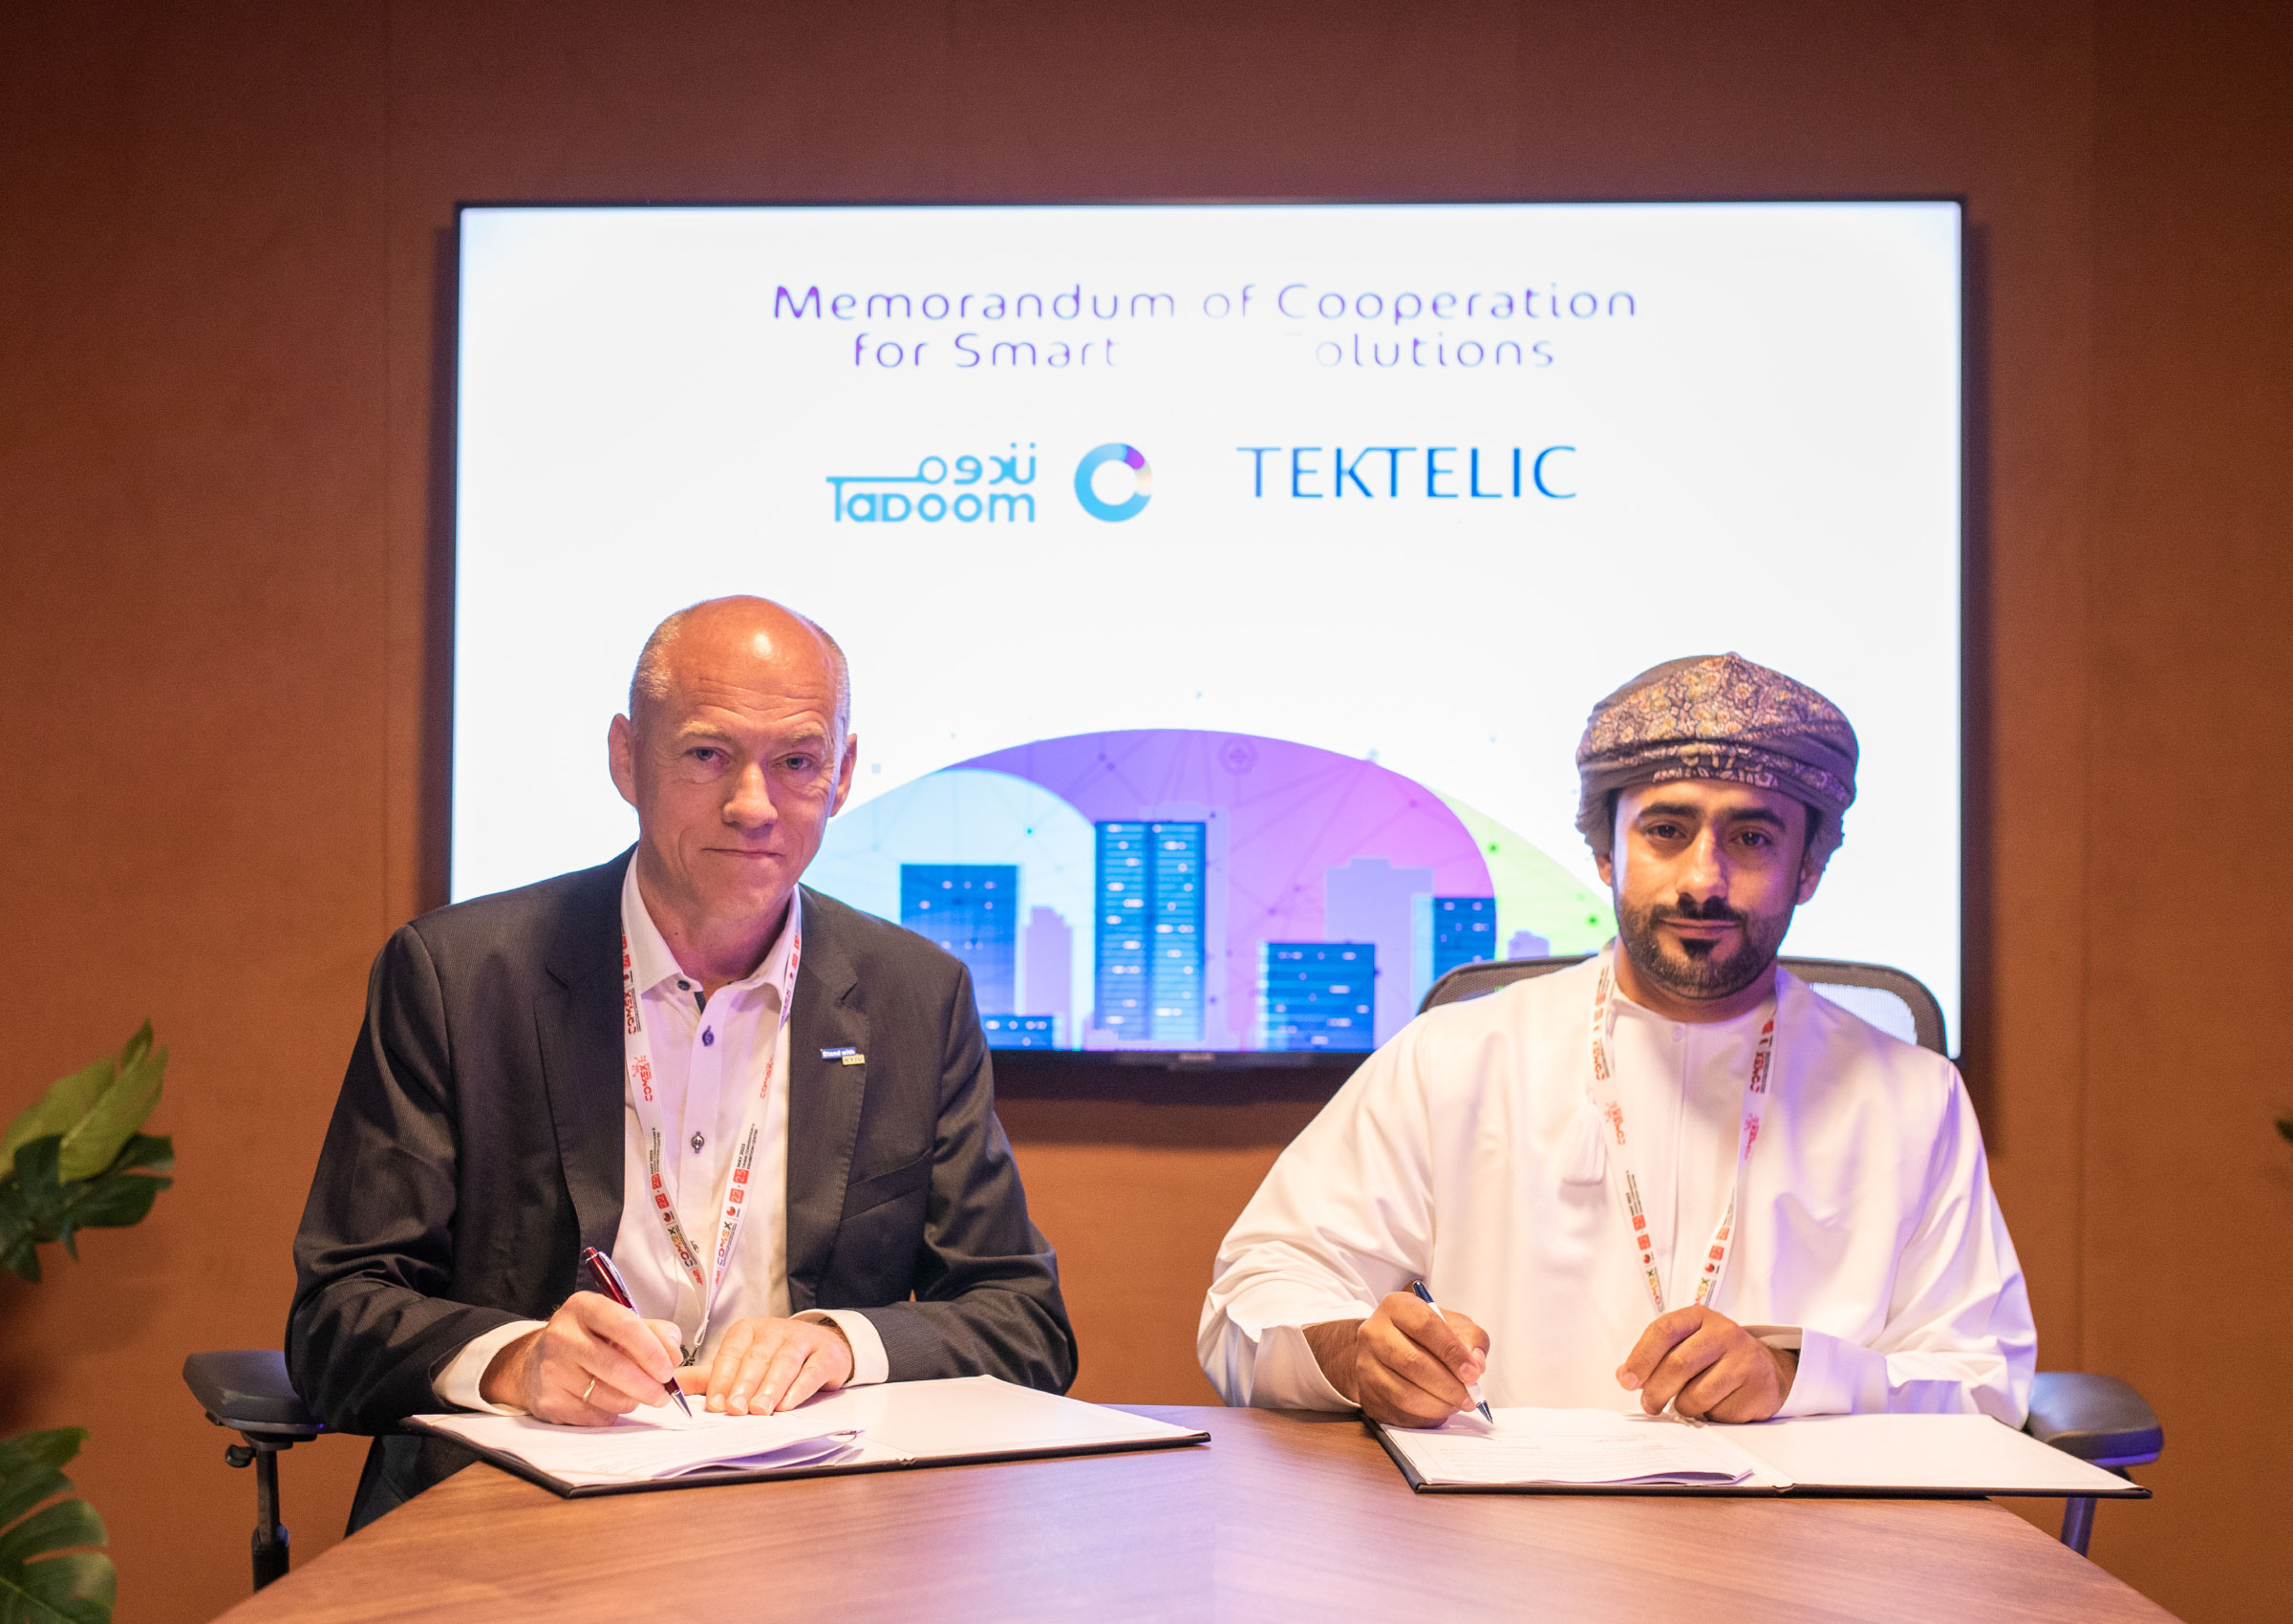 TADOOM and TEKTELIC develop Smart Cities solutions in Oman